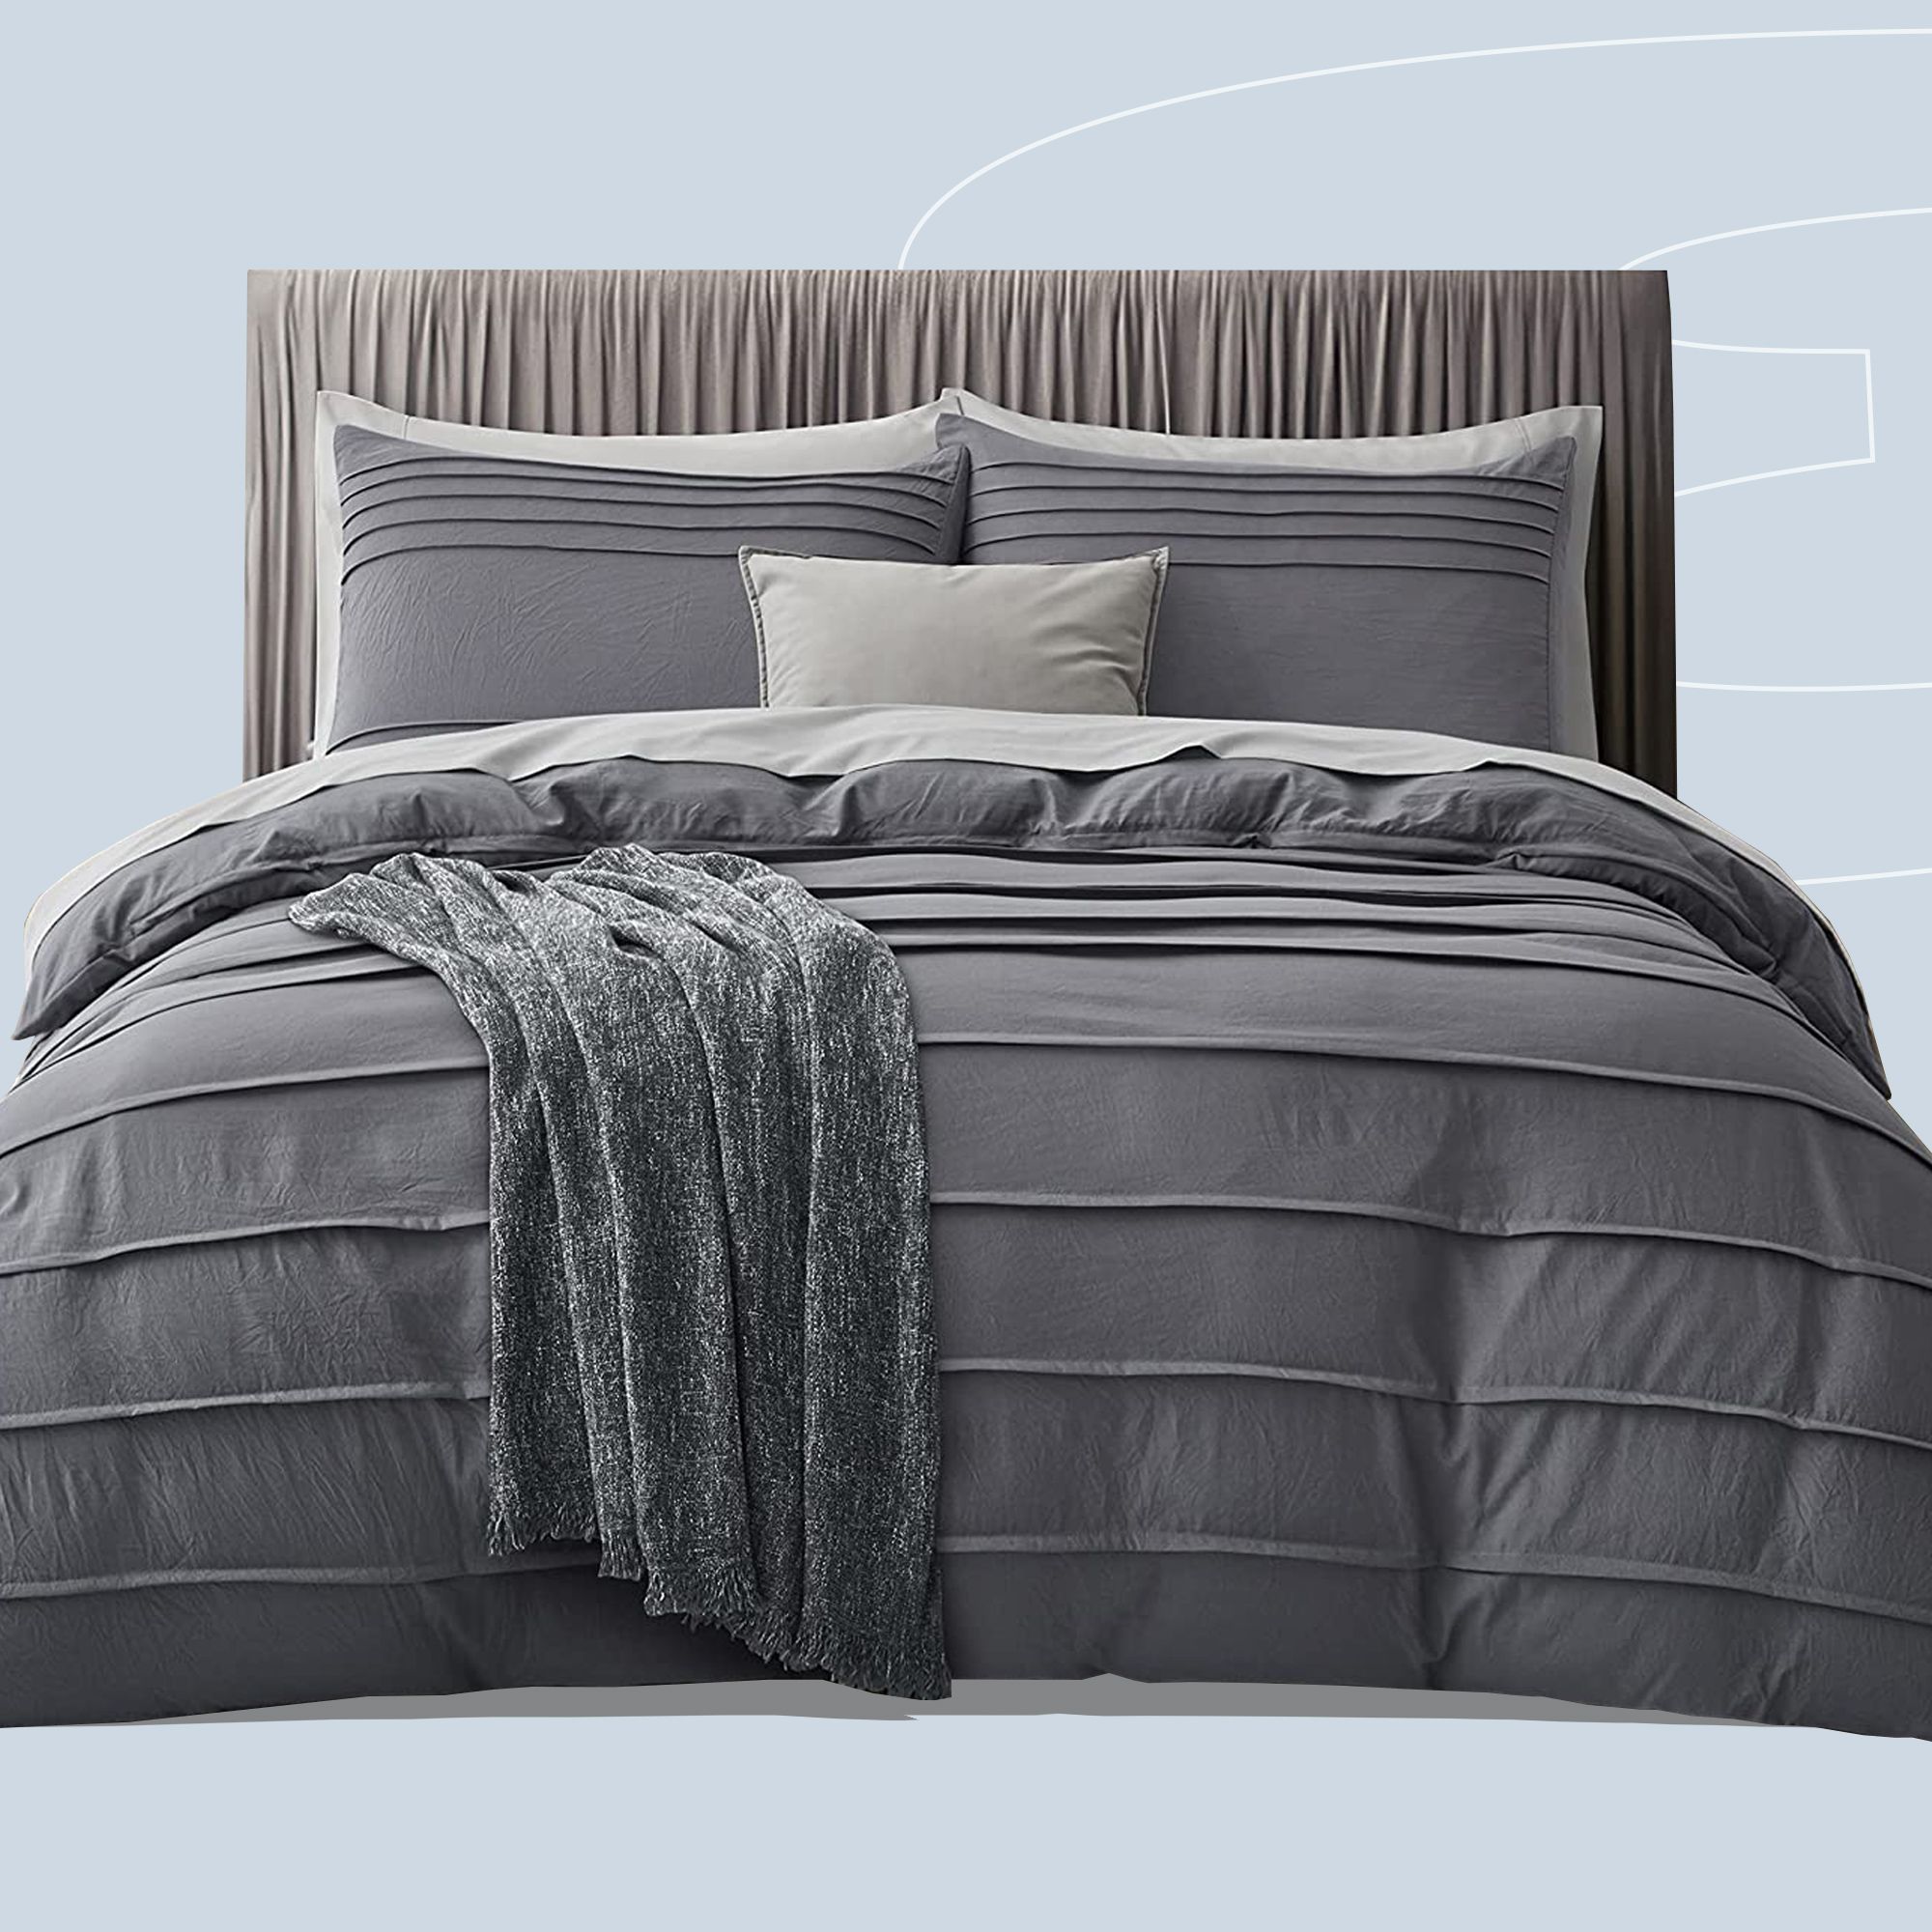 This Top-Rated Bedding Set Is Less Than $42 on Amazon Right Now